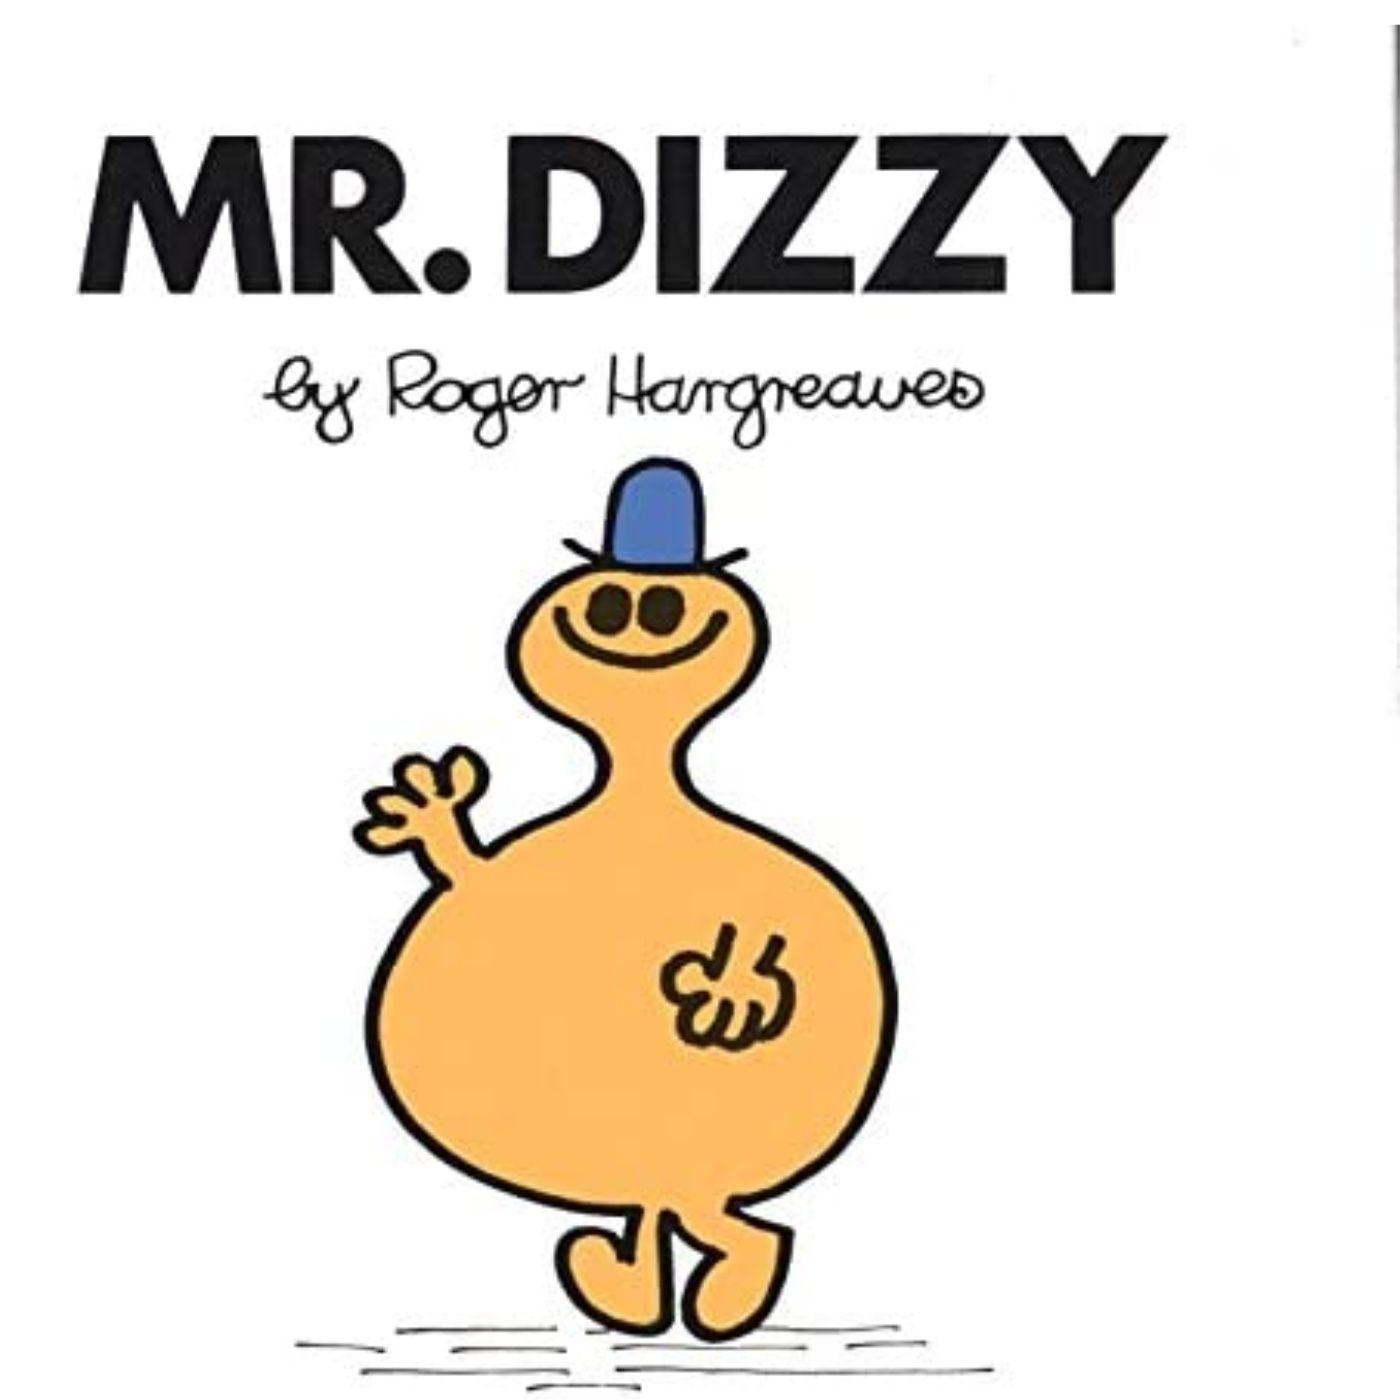 Mr. Dizzy by Roger Hargreaves 24 of 24 Tribute - Read by Martyn Kenneth